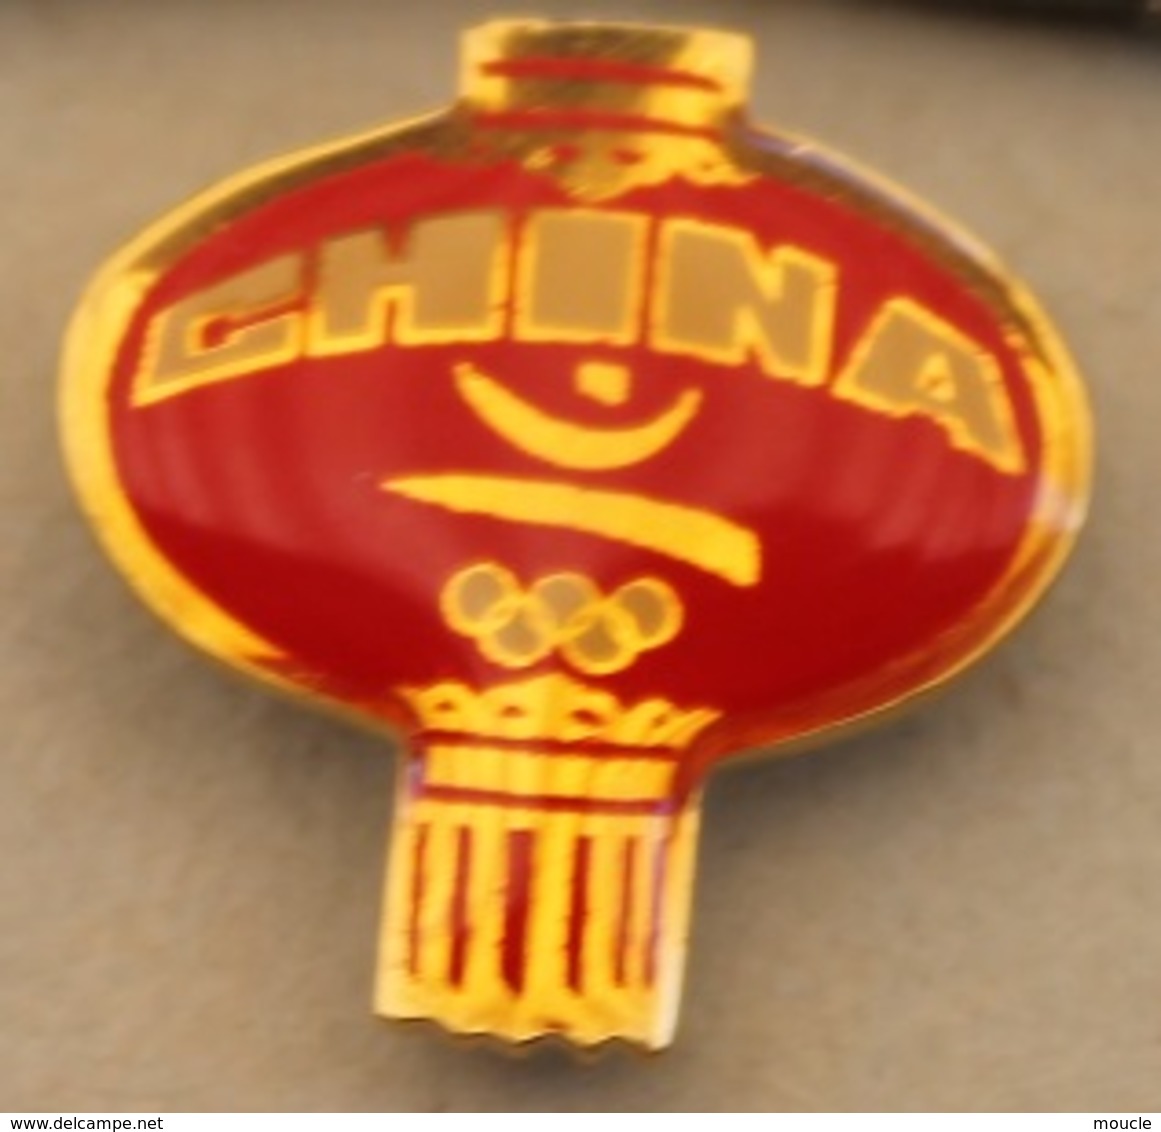 JEUX OLYMPIQUES  - TEAM CHINA - EQUIPE DE CHINE - COMITE OLYMPIQUE - BARCELONA 92   -      (20) - Olympische Spelen